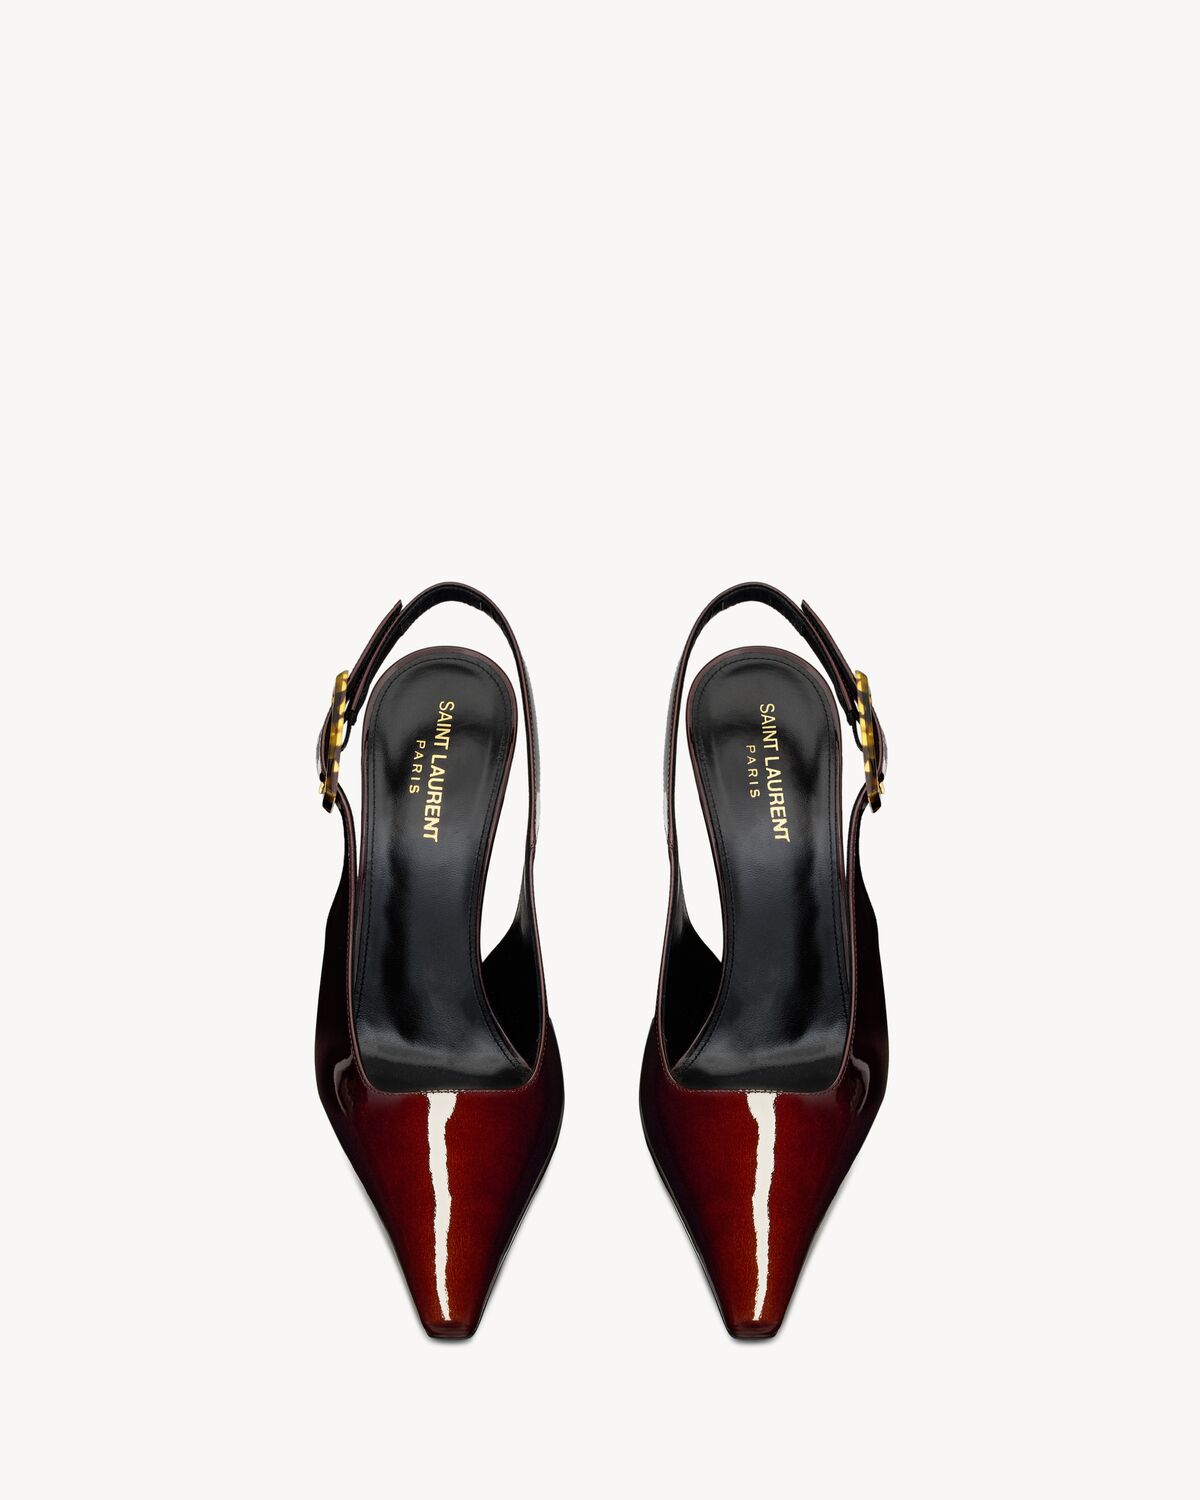 DUNE slingback pumps in patent leather